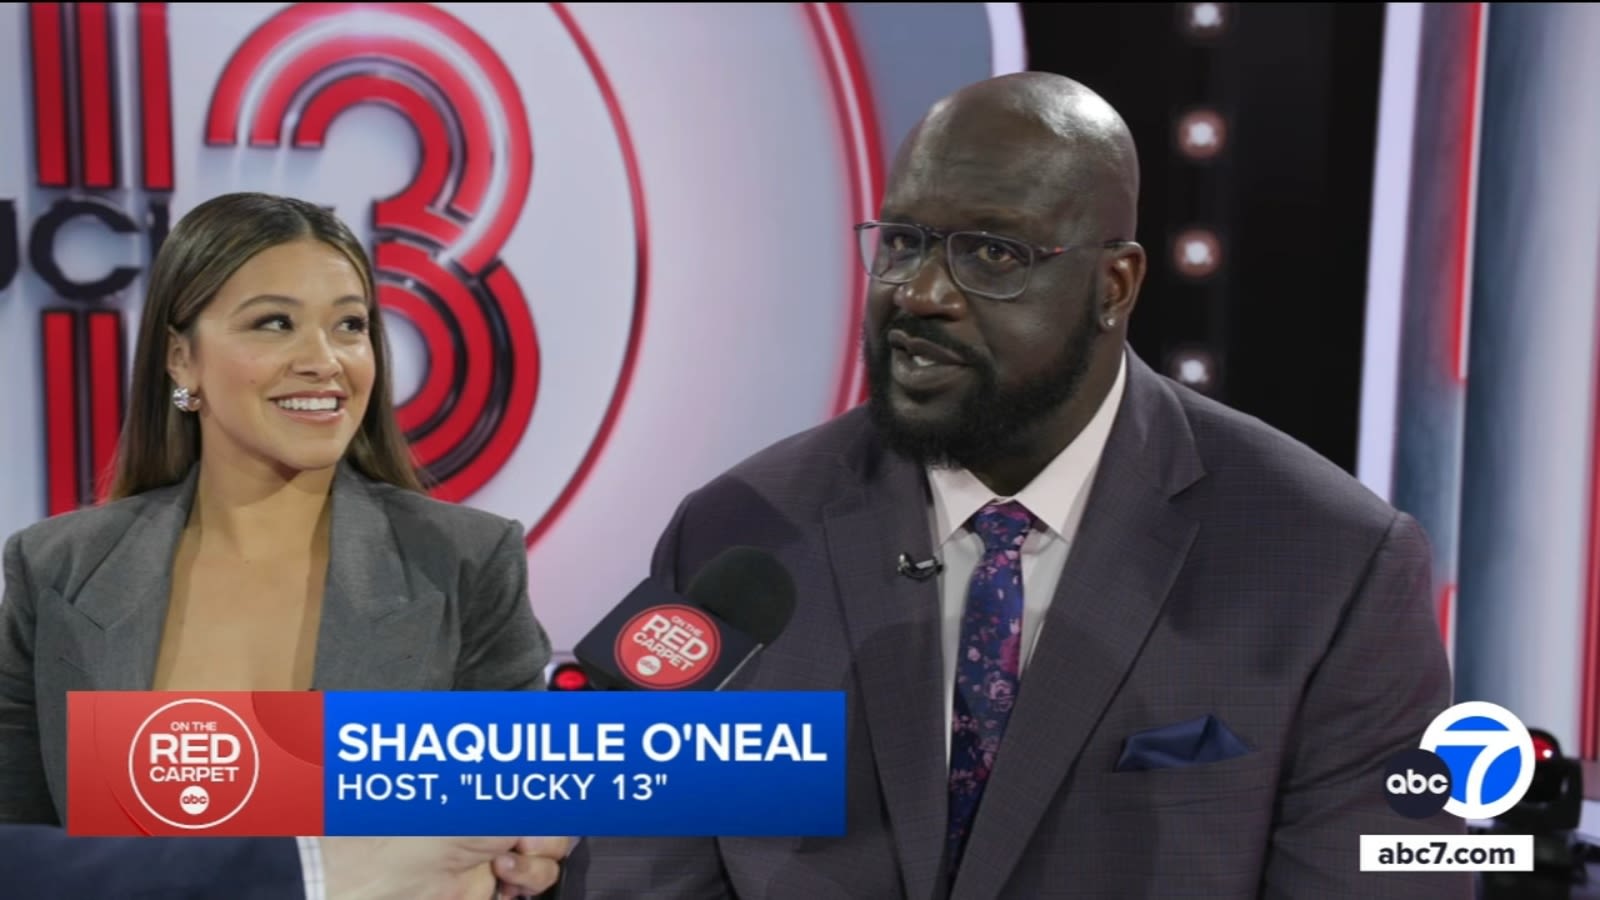 In 'Lucky 13,' Shaquille O'Neal, Gina Rodriguez test contestants knowledge for chance to win money